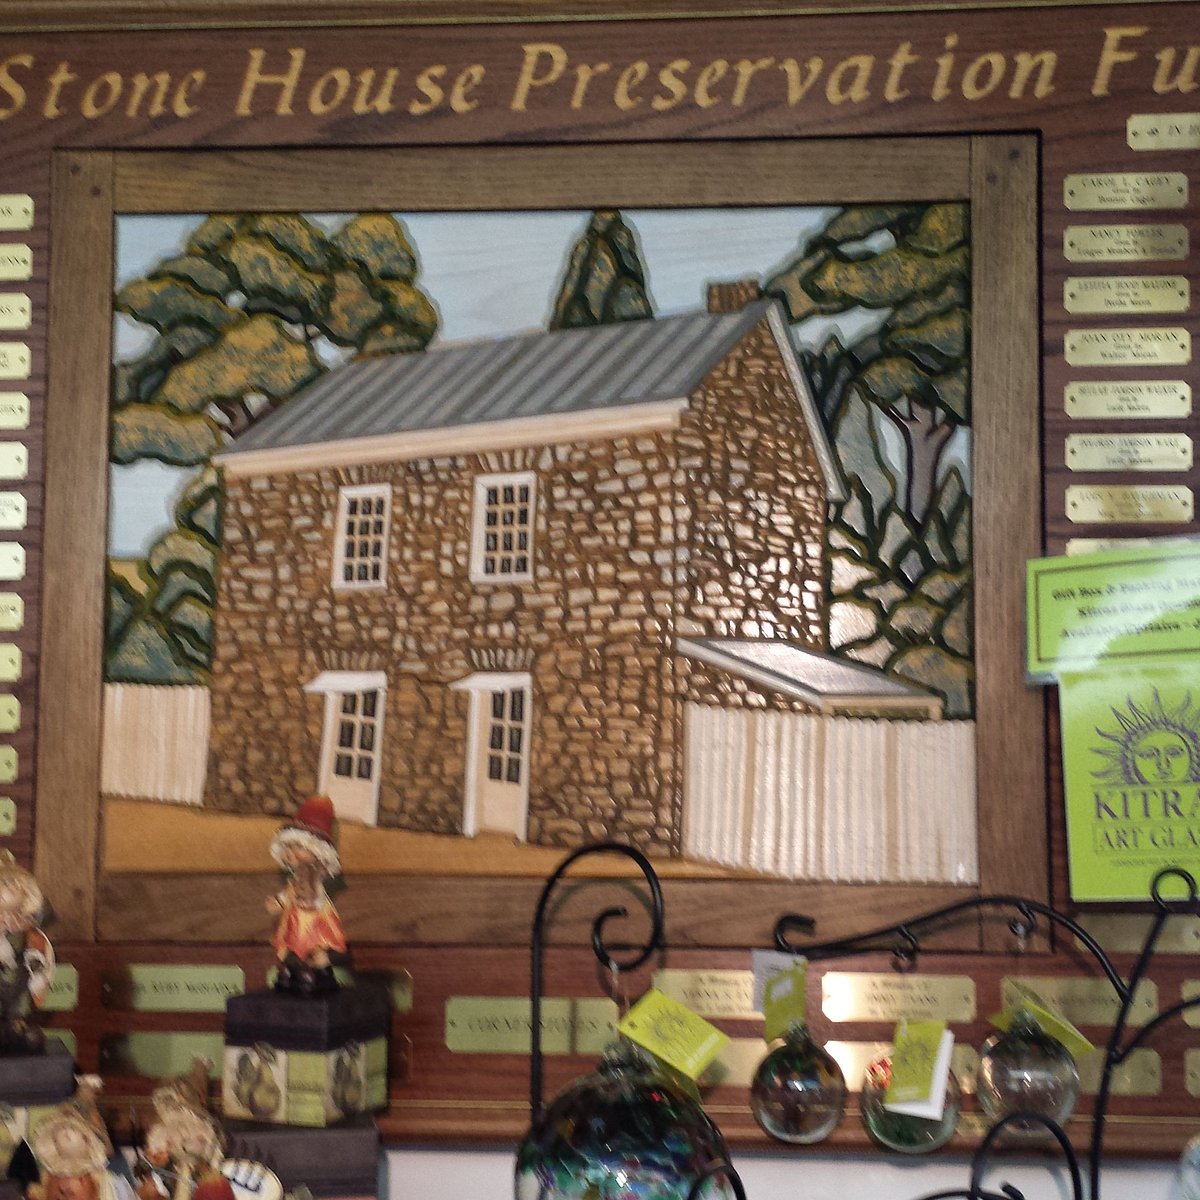 Our Family Craft Shop Morgantown Wv - Old Stone House Gift Shop (Morgantown) - All You Need to Know BEFORE You Go